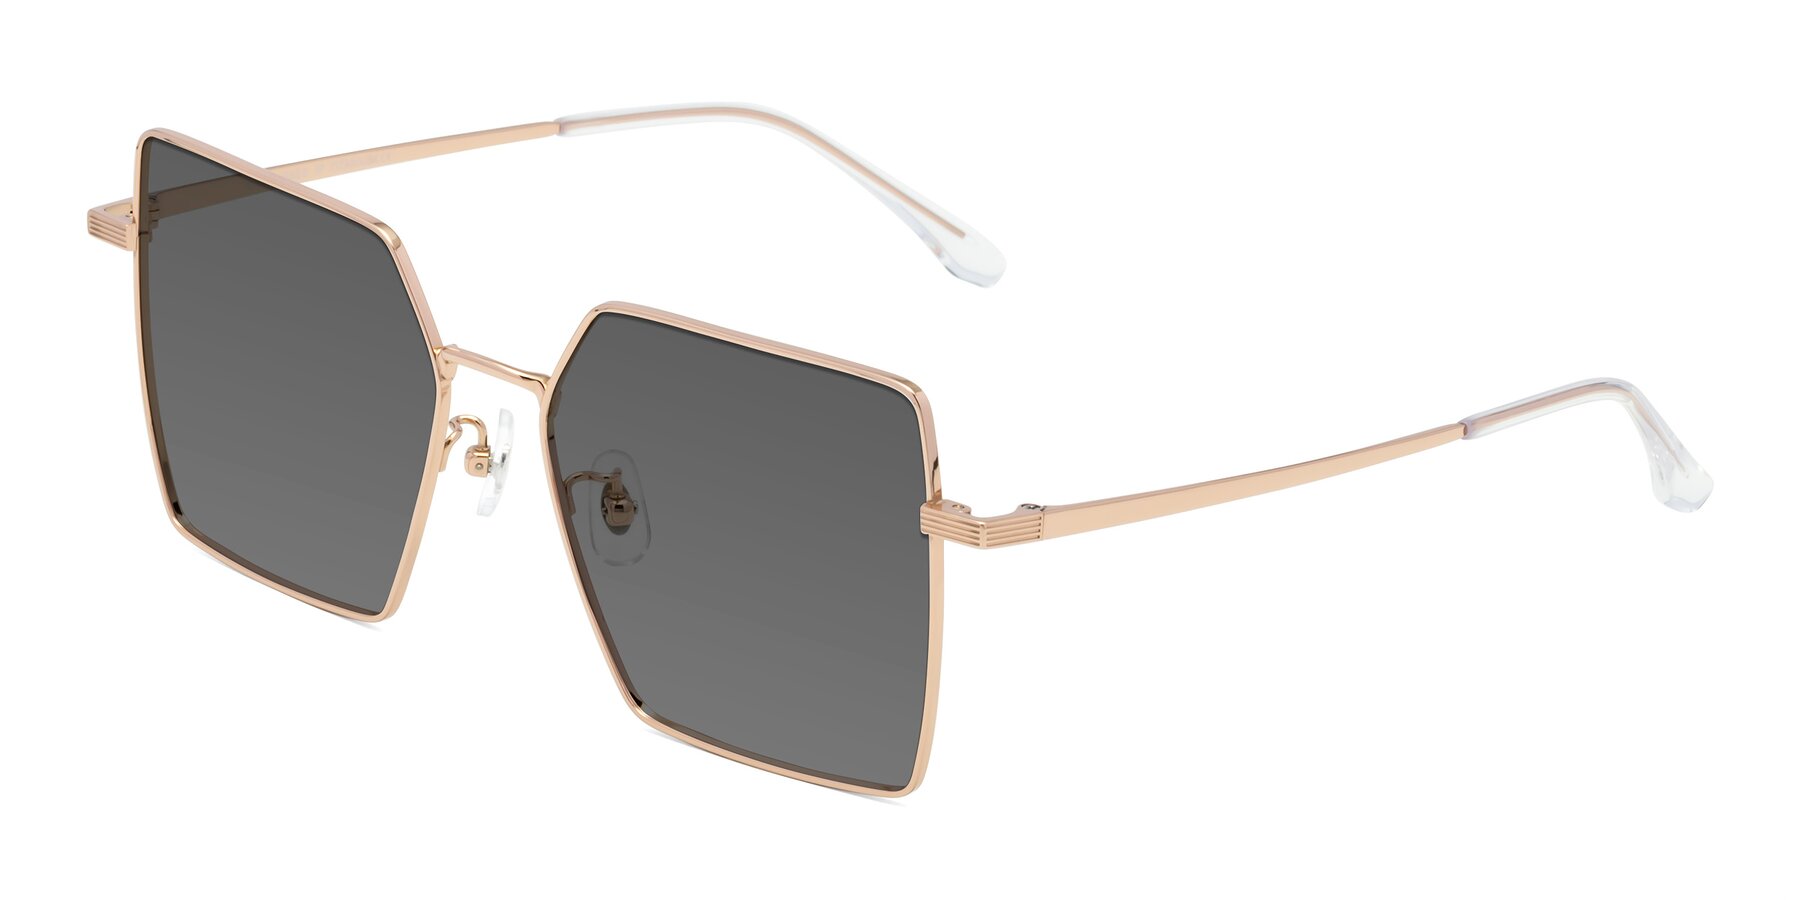 Angle of La Villa in Rose Gold with Medium Gray Tinted Lenses